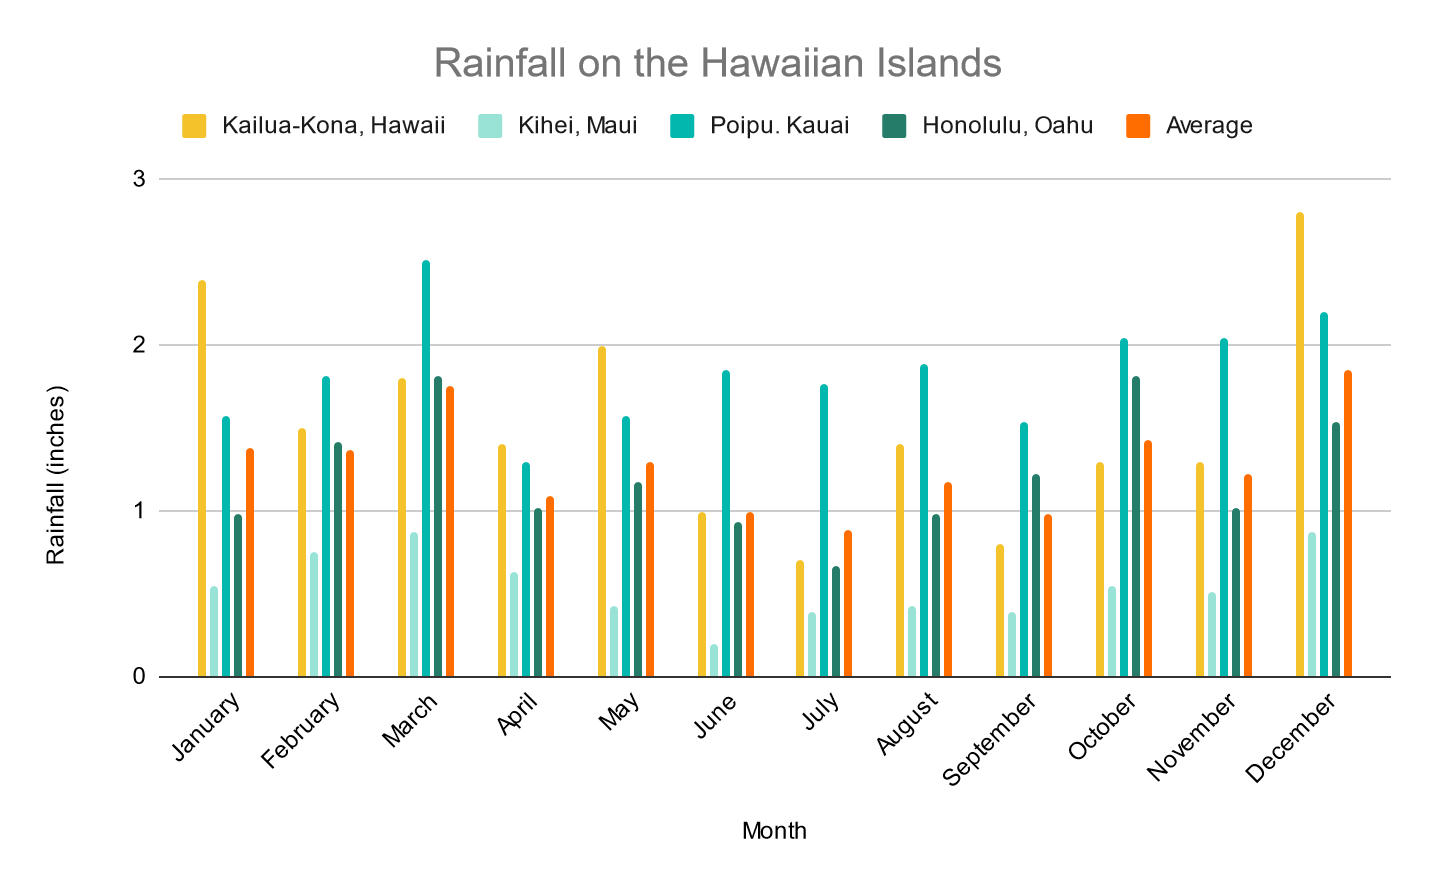 Hawaii in August - rainfall on the Hawaiian islands by month, by island: April to September gets the least, October to March gets the most, with Kauai and the Big Island getting the most overall.